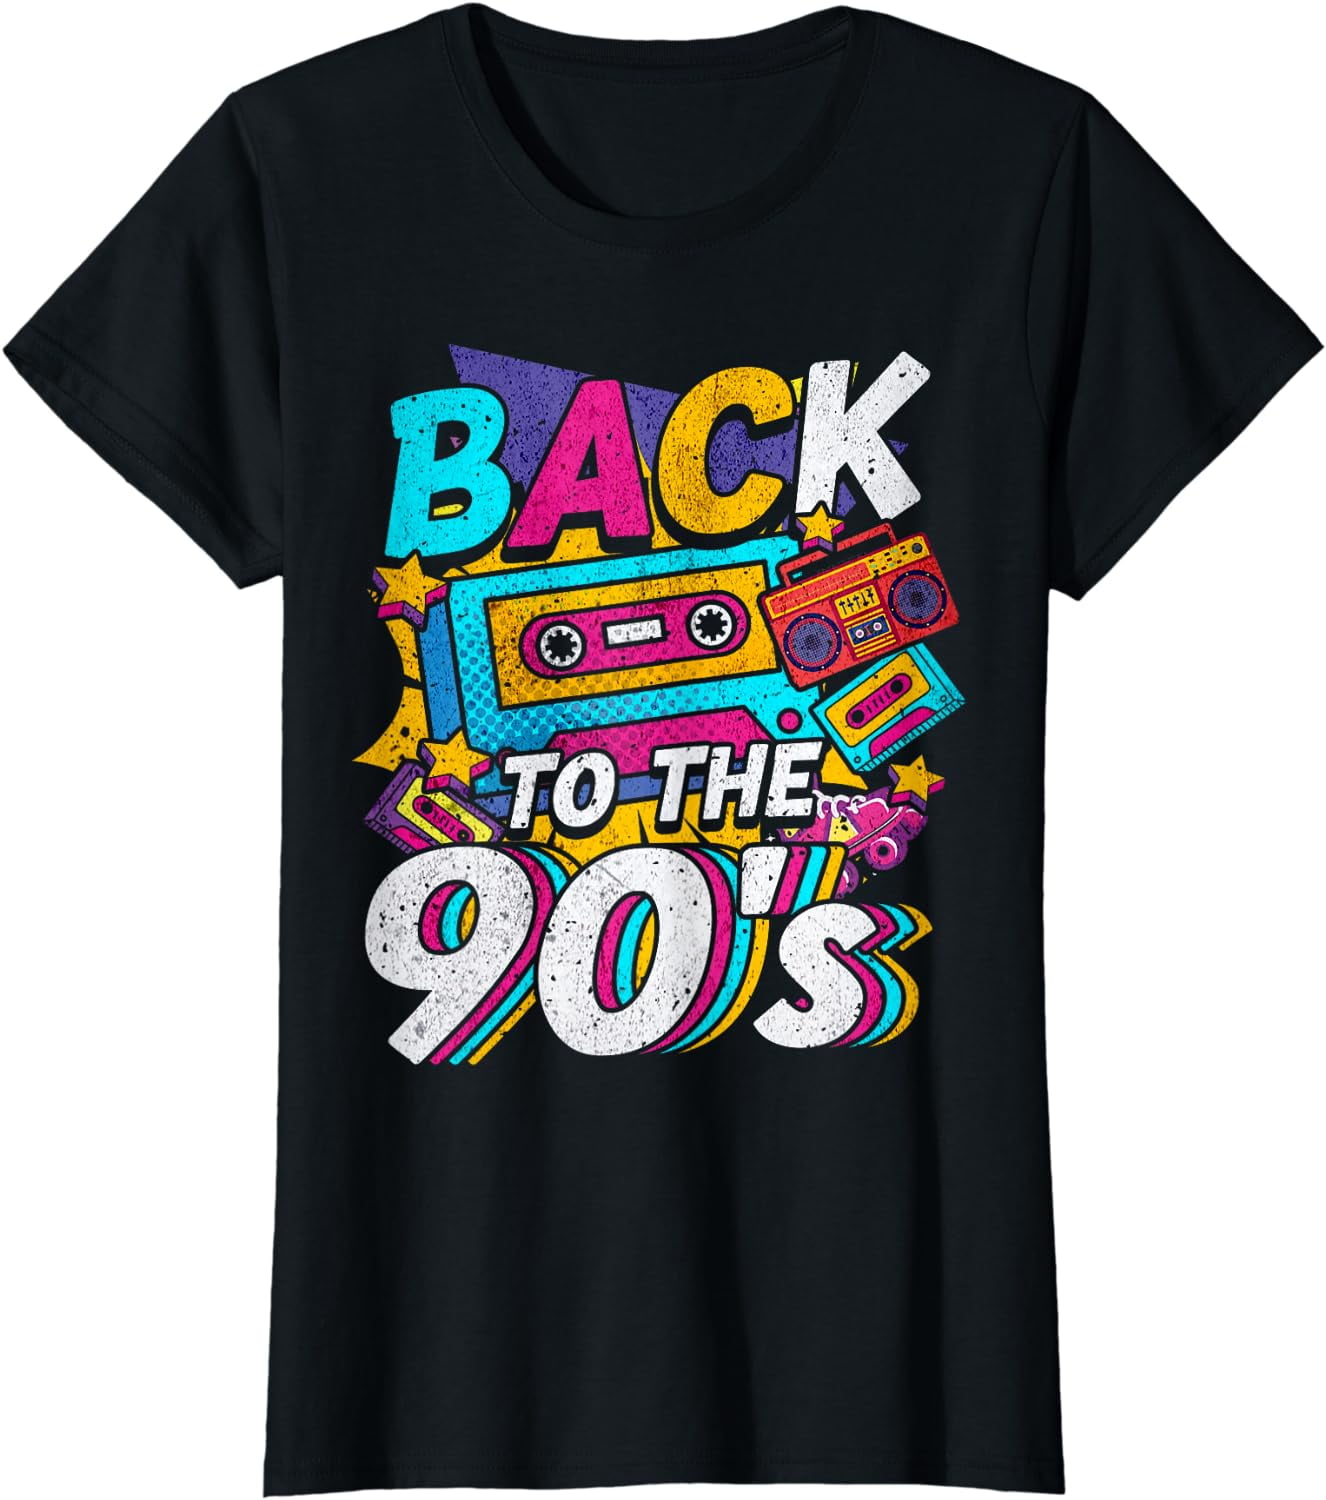 90s outfit party and theme party costume for men and women T-Shirt ...